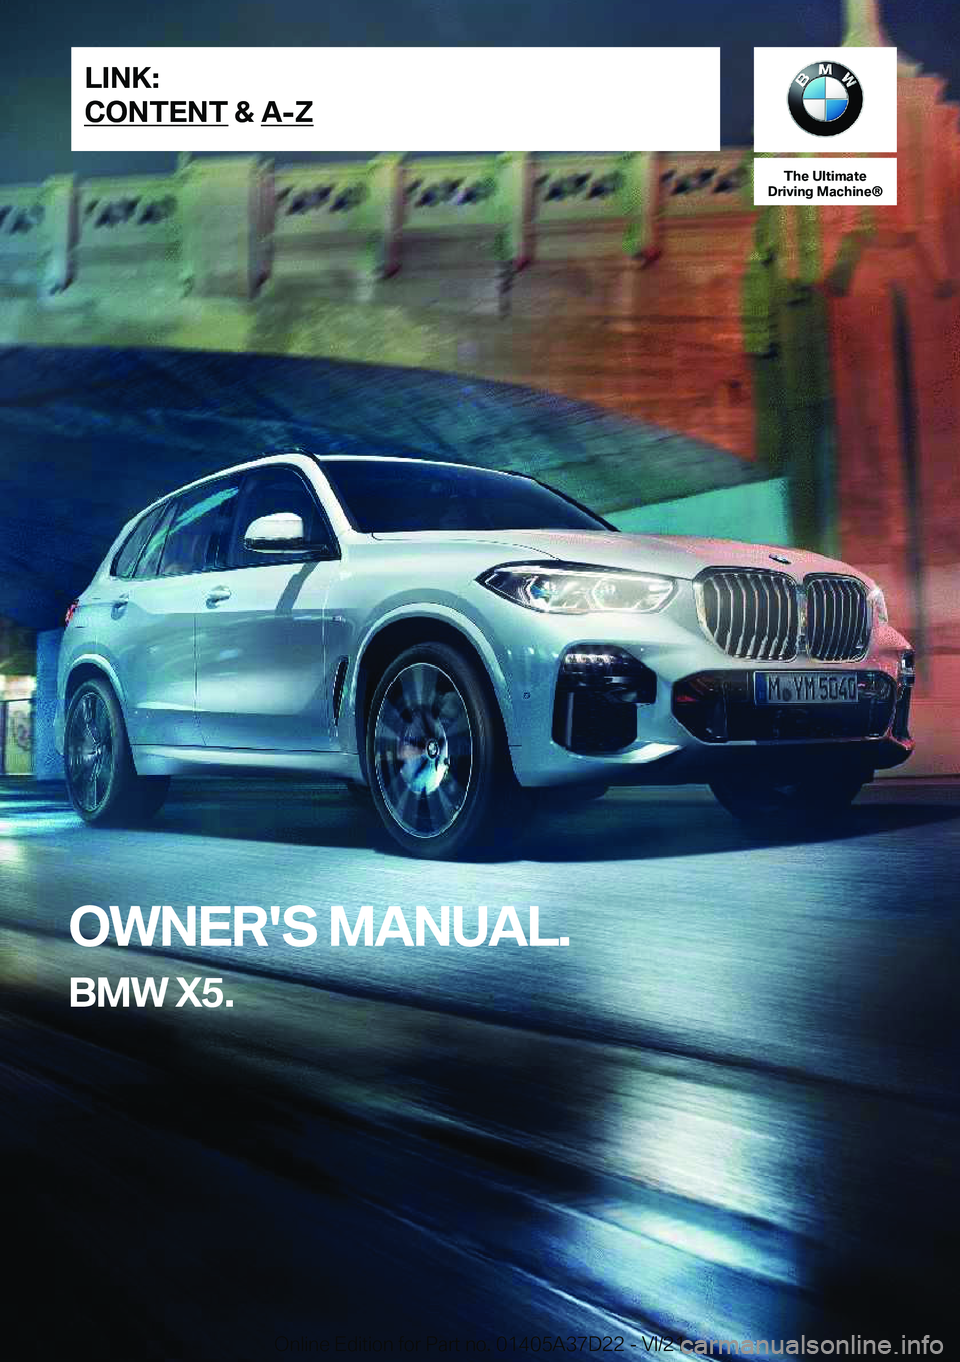 BMW X5 2022  Owners Manual �T�h�e��U�l�t�i�m�a�t�e
�D�r�i�v�i�n�g��M�a�c�h�i�n�e�n
�O�W�N�E�R�'�S��M�A�N�U�A�L�.
�B�M�W��X�5�.�L�I�N�K�:
�C�O�N�T�E�N�T��&��A�-�Z�O�n�l�i�n�e��E�d�i�t�i�o�n��f�o�r��P�a�r�t��n�o�.�